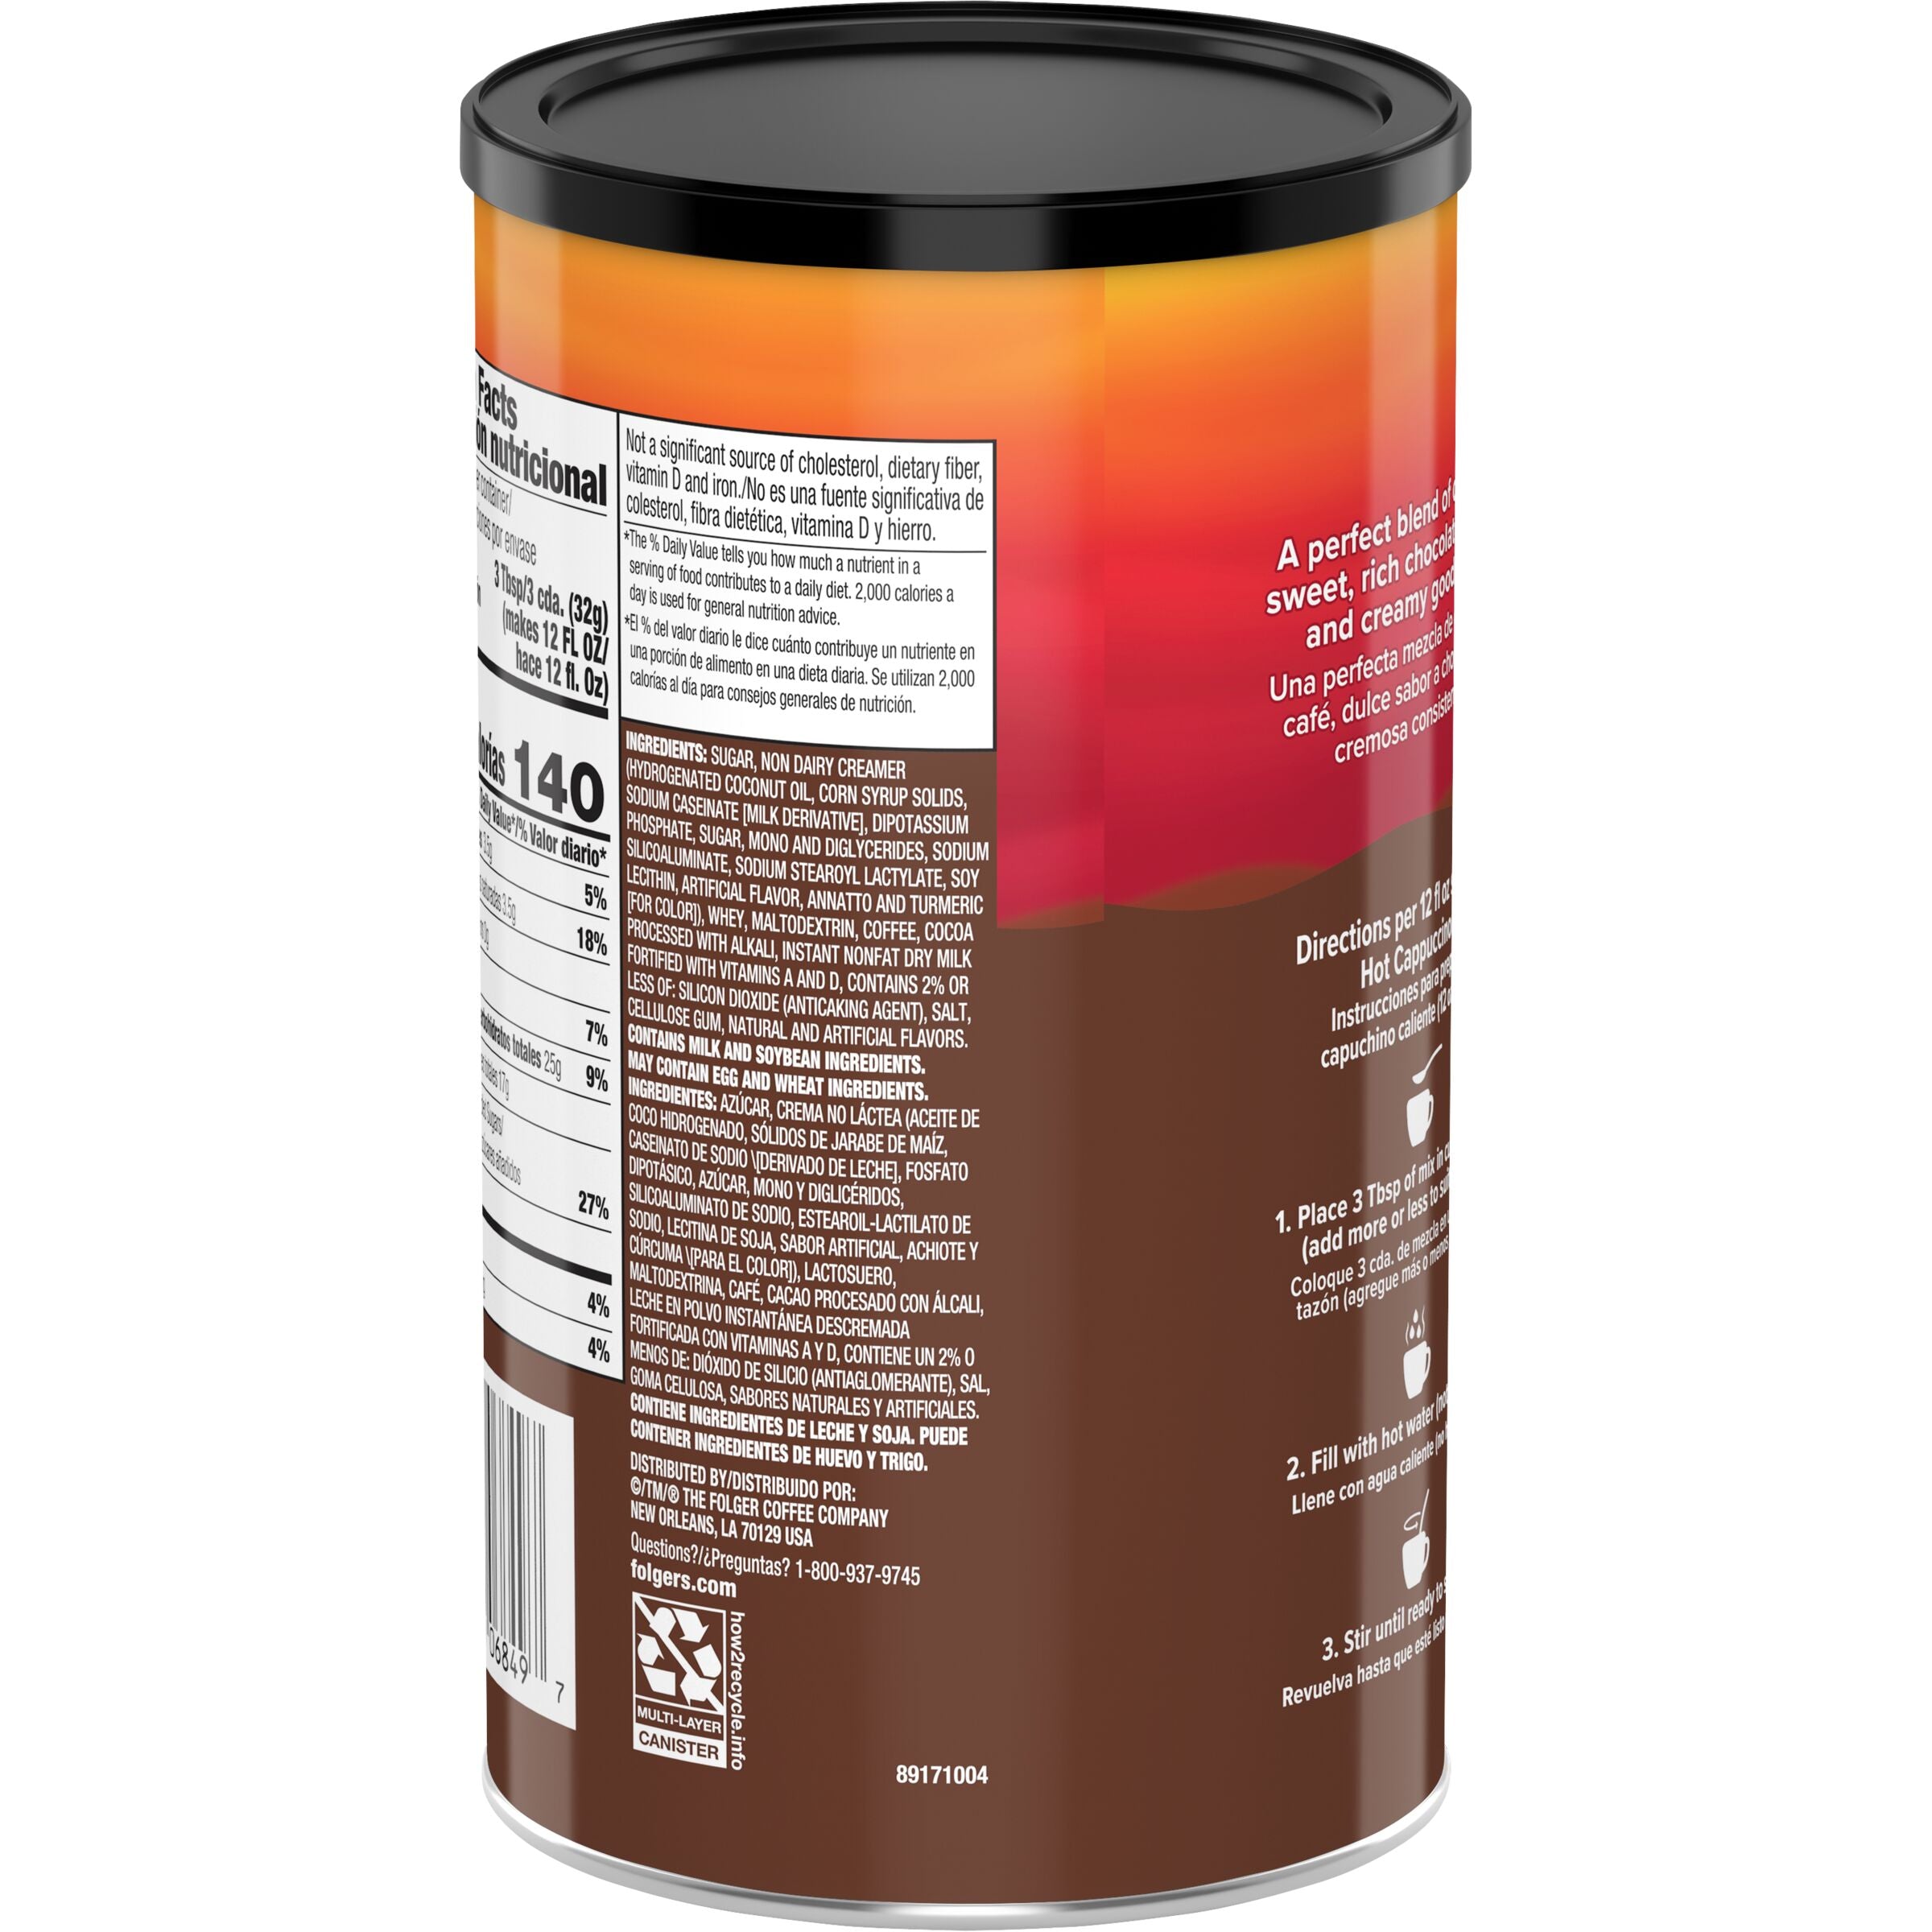 Folgers Mocha Chocolate Flavored Cappuccino Canister, 16 oz